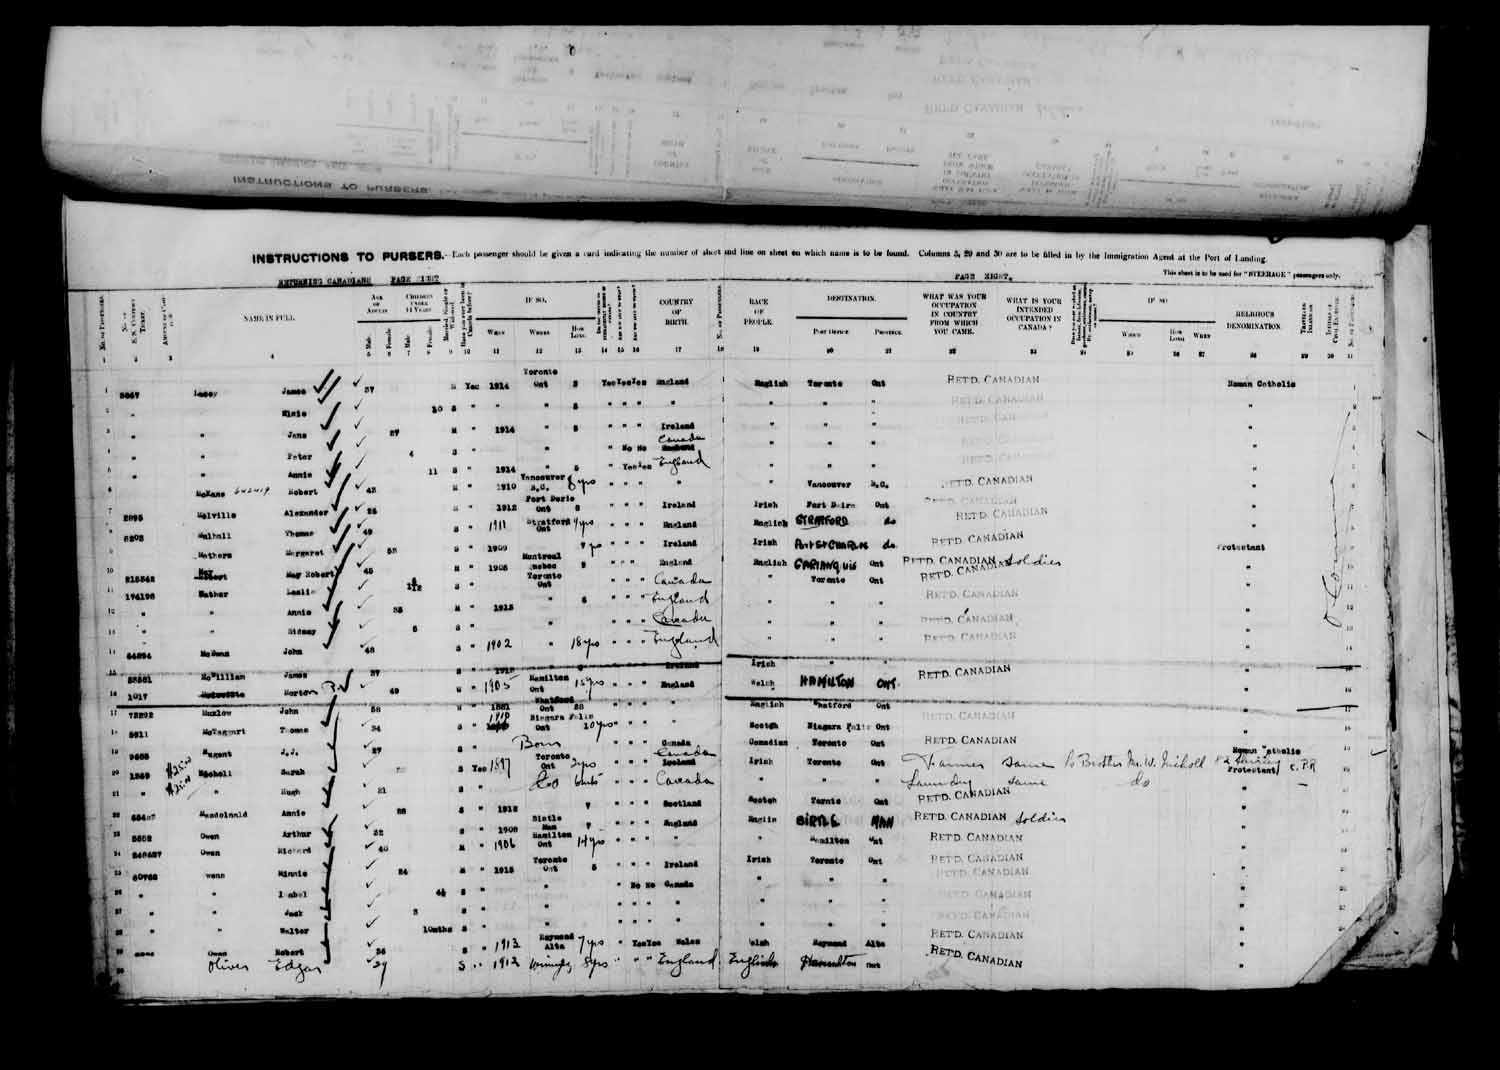 Digitized page of Passenger Lists for Image No.: e003610635